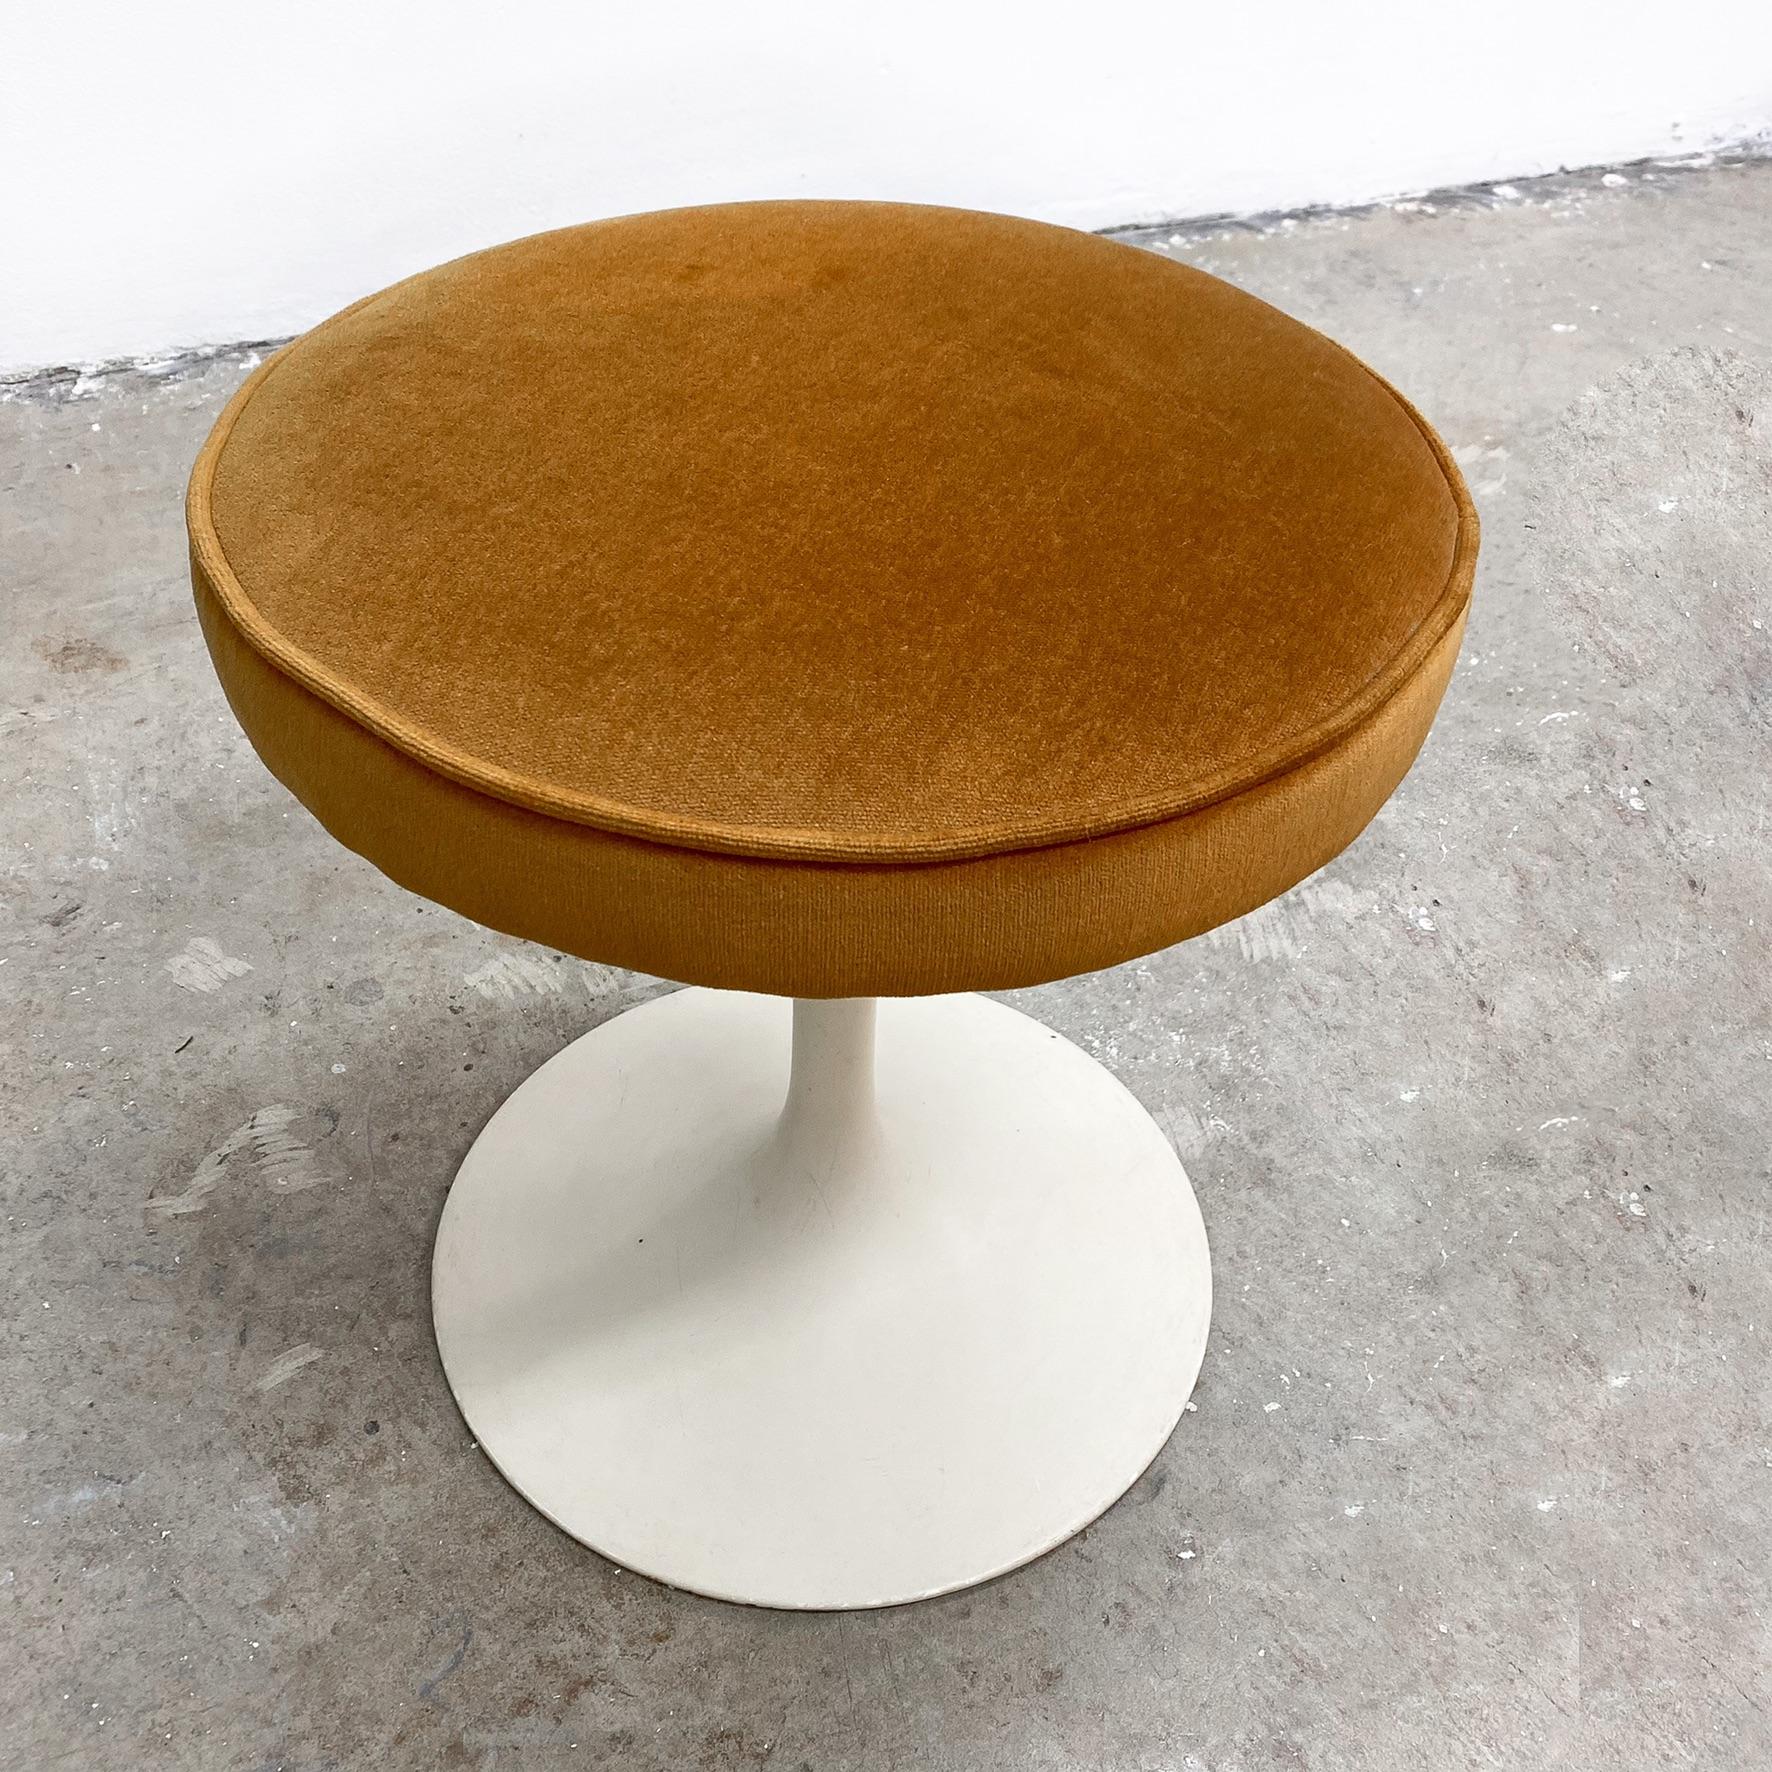 1960's Mid Century Tulip Saarinen Stool, Original Upholstery In Good Condition For Sale In KINGSFORD, NSW